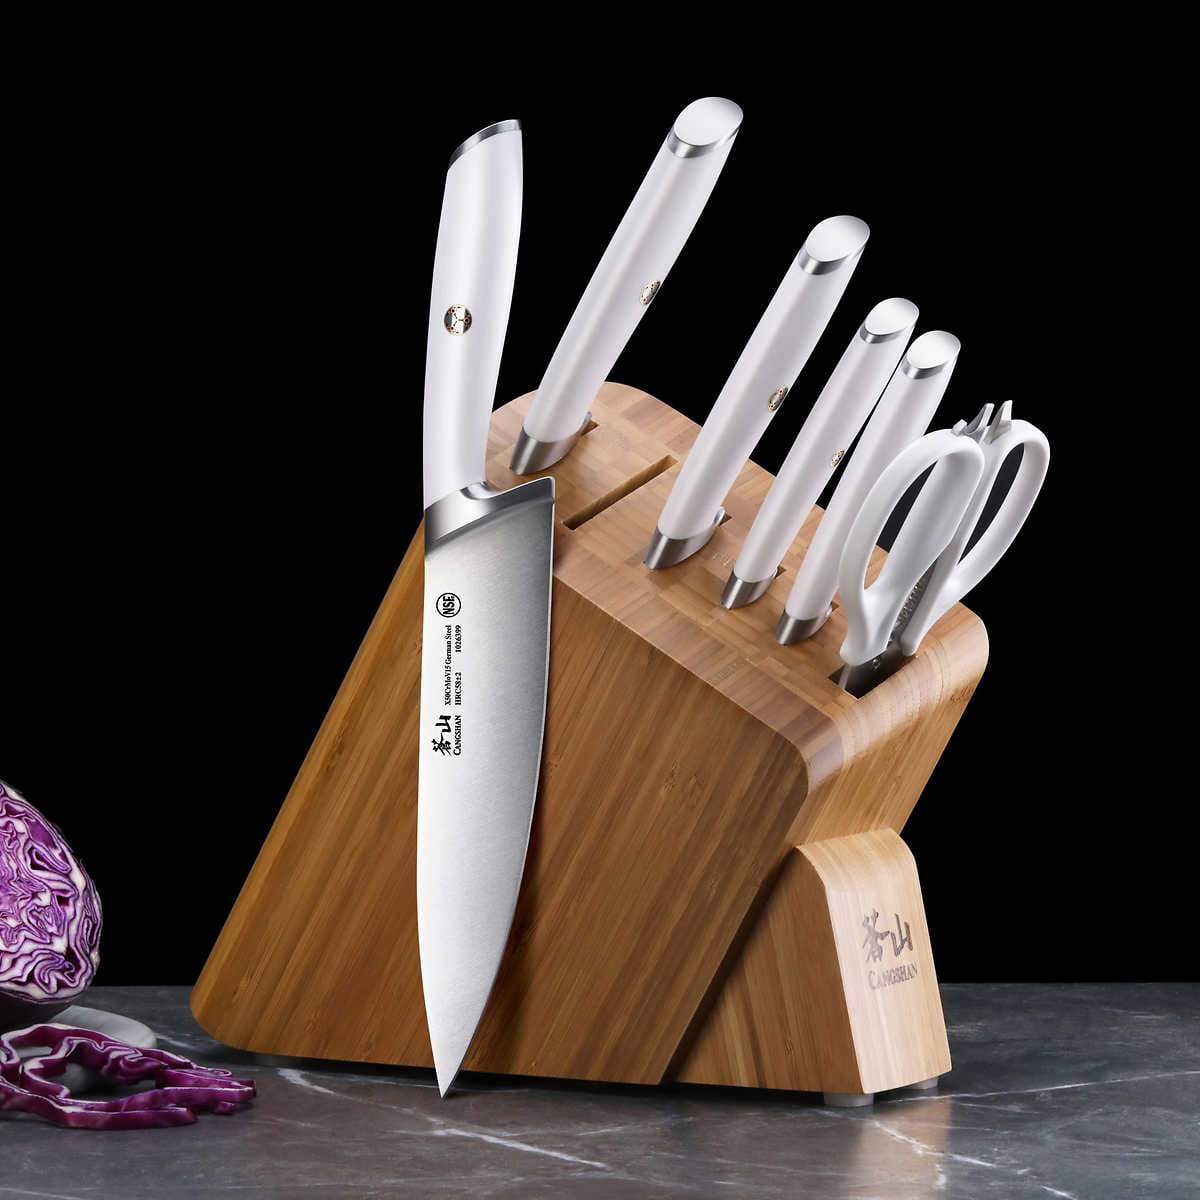 Cangshan L1 Series 7-piece German Steel Forged Knife Set 